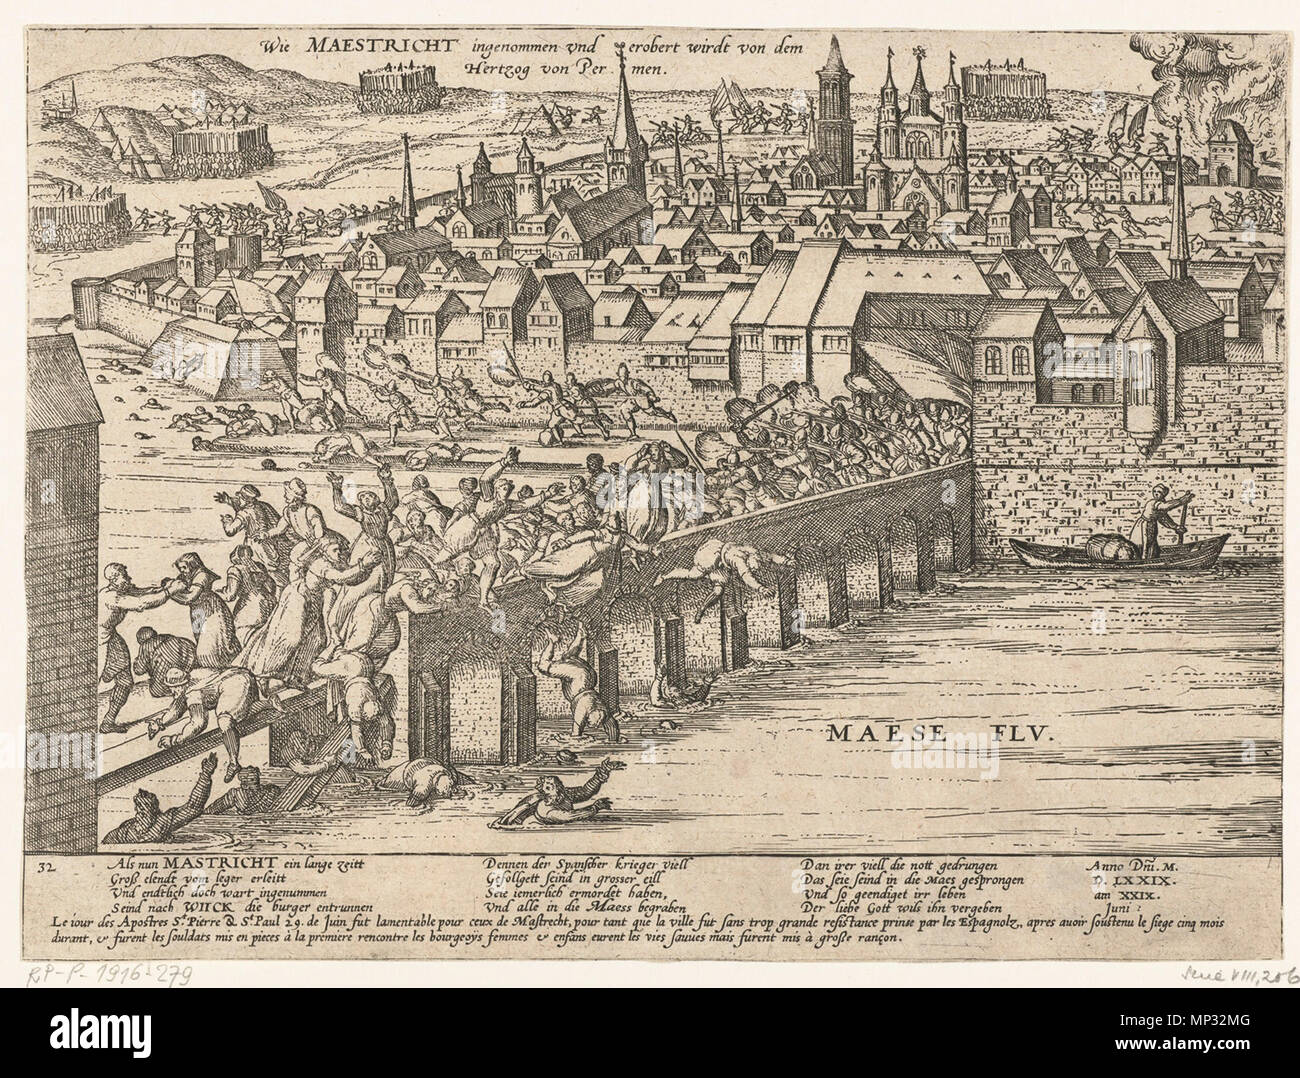 . Siege of Maastricht (1579) . between 1579 and 1581.   Frans Hogenberg  (before 1540–1590)    Alternative names Franz Hogenberg, Frans Hogenbergh, Frans Hogenberch  Description Flemish engraver and cartographer  Date of birth/death before 1540 1590  Location of birth/death Mechelen Cologne  Work period 1568-1588  Work location Antwerp (1568), London (1568), Cologne (1570-1585), Hamburg (1585-1588), Denmark (1588)  Authority control  : Q959748 VIAF: 100197099 ISNI: 0000 0001 1839 1431 ULAN: 500000956 LCCN: n50043890 WGA: HOGENBERG, Frans WorldCat 838 Maastricht ingenomen door Parma, 1579, Fran Stock Photo